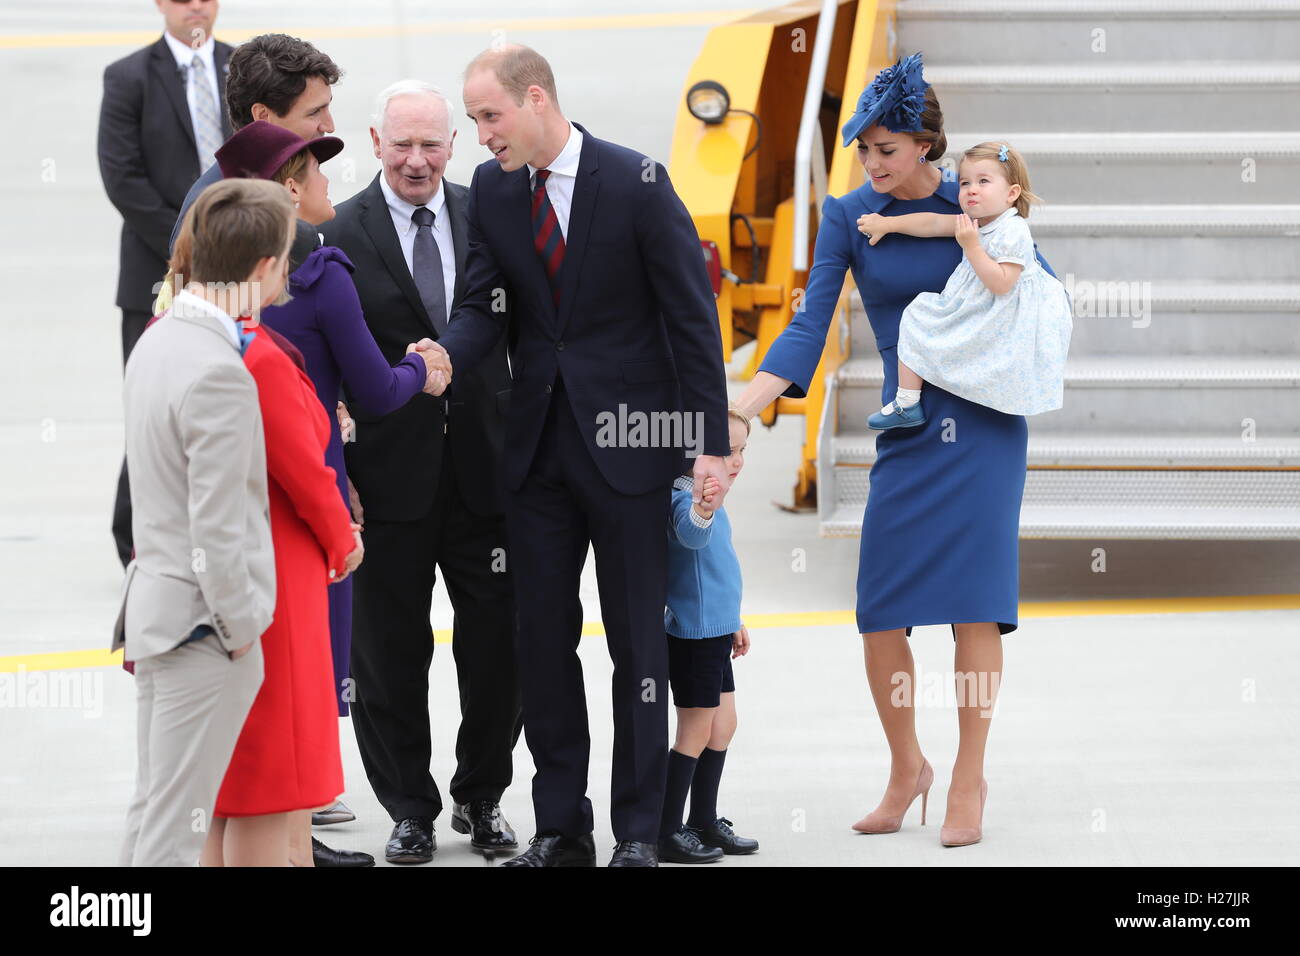 The Prime Minister of Canada Justin Trudeau (fourth left) and his wife Sophie (third left) greet the Duke and Duchess of Cambridge and their children Prince George and Princess Charlotte, as the Royal party arrive at Victoria International Airport, in Victoria, Canada, on the first day of their official tour of Canada. Stock Photo